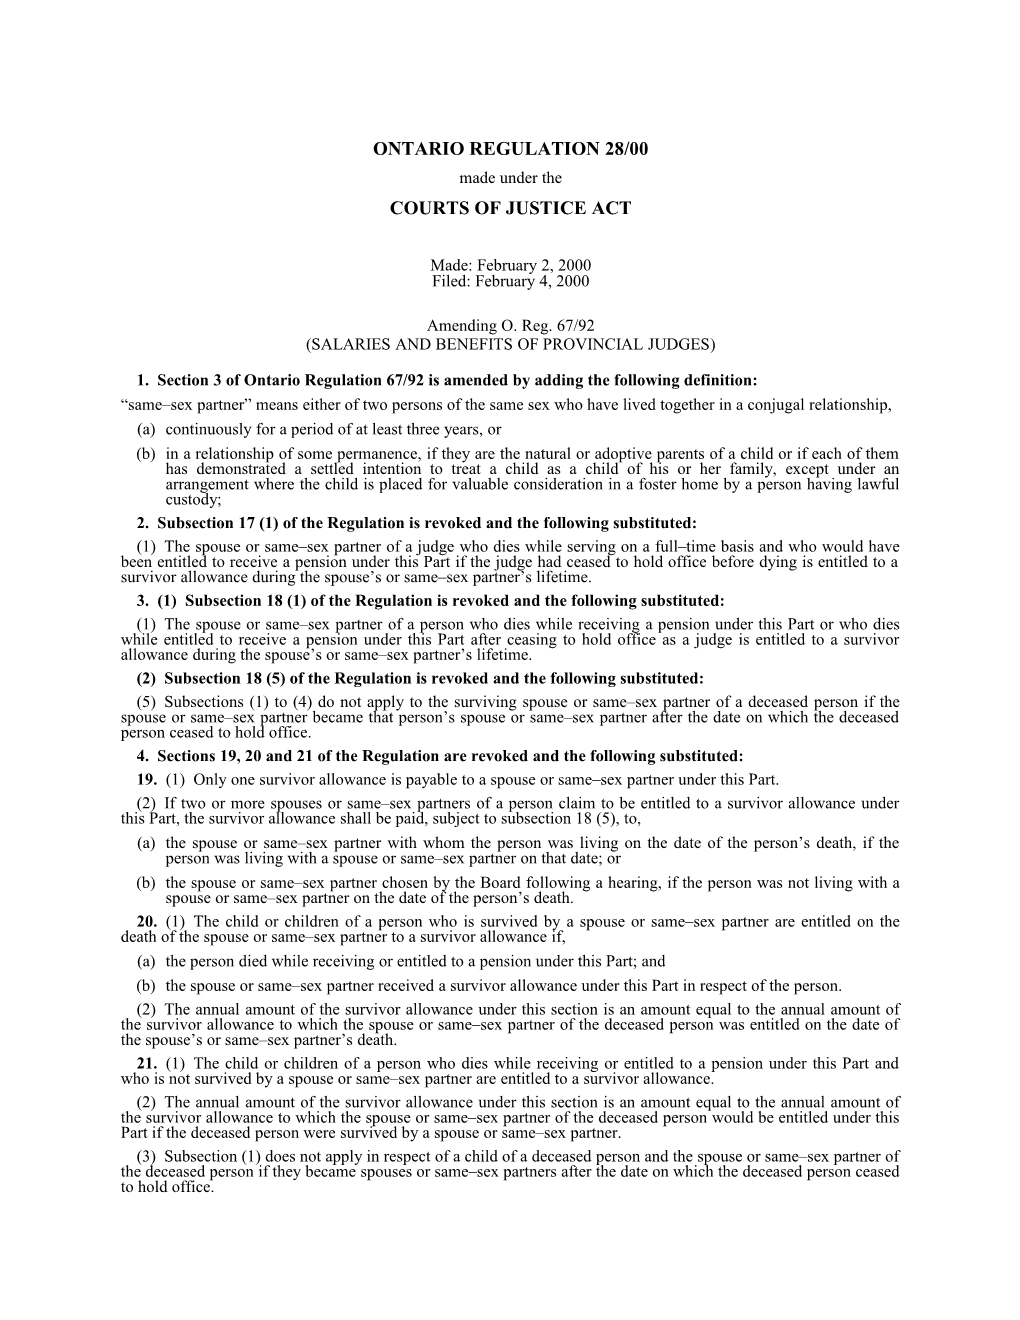 COURTS of JUSTICE ACT - O. Reg. 28/00